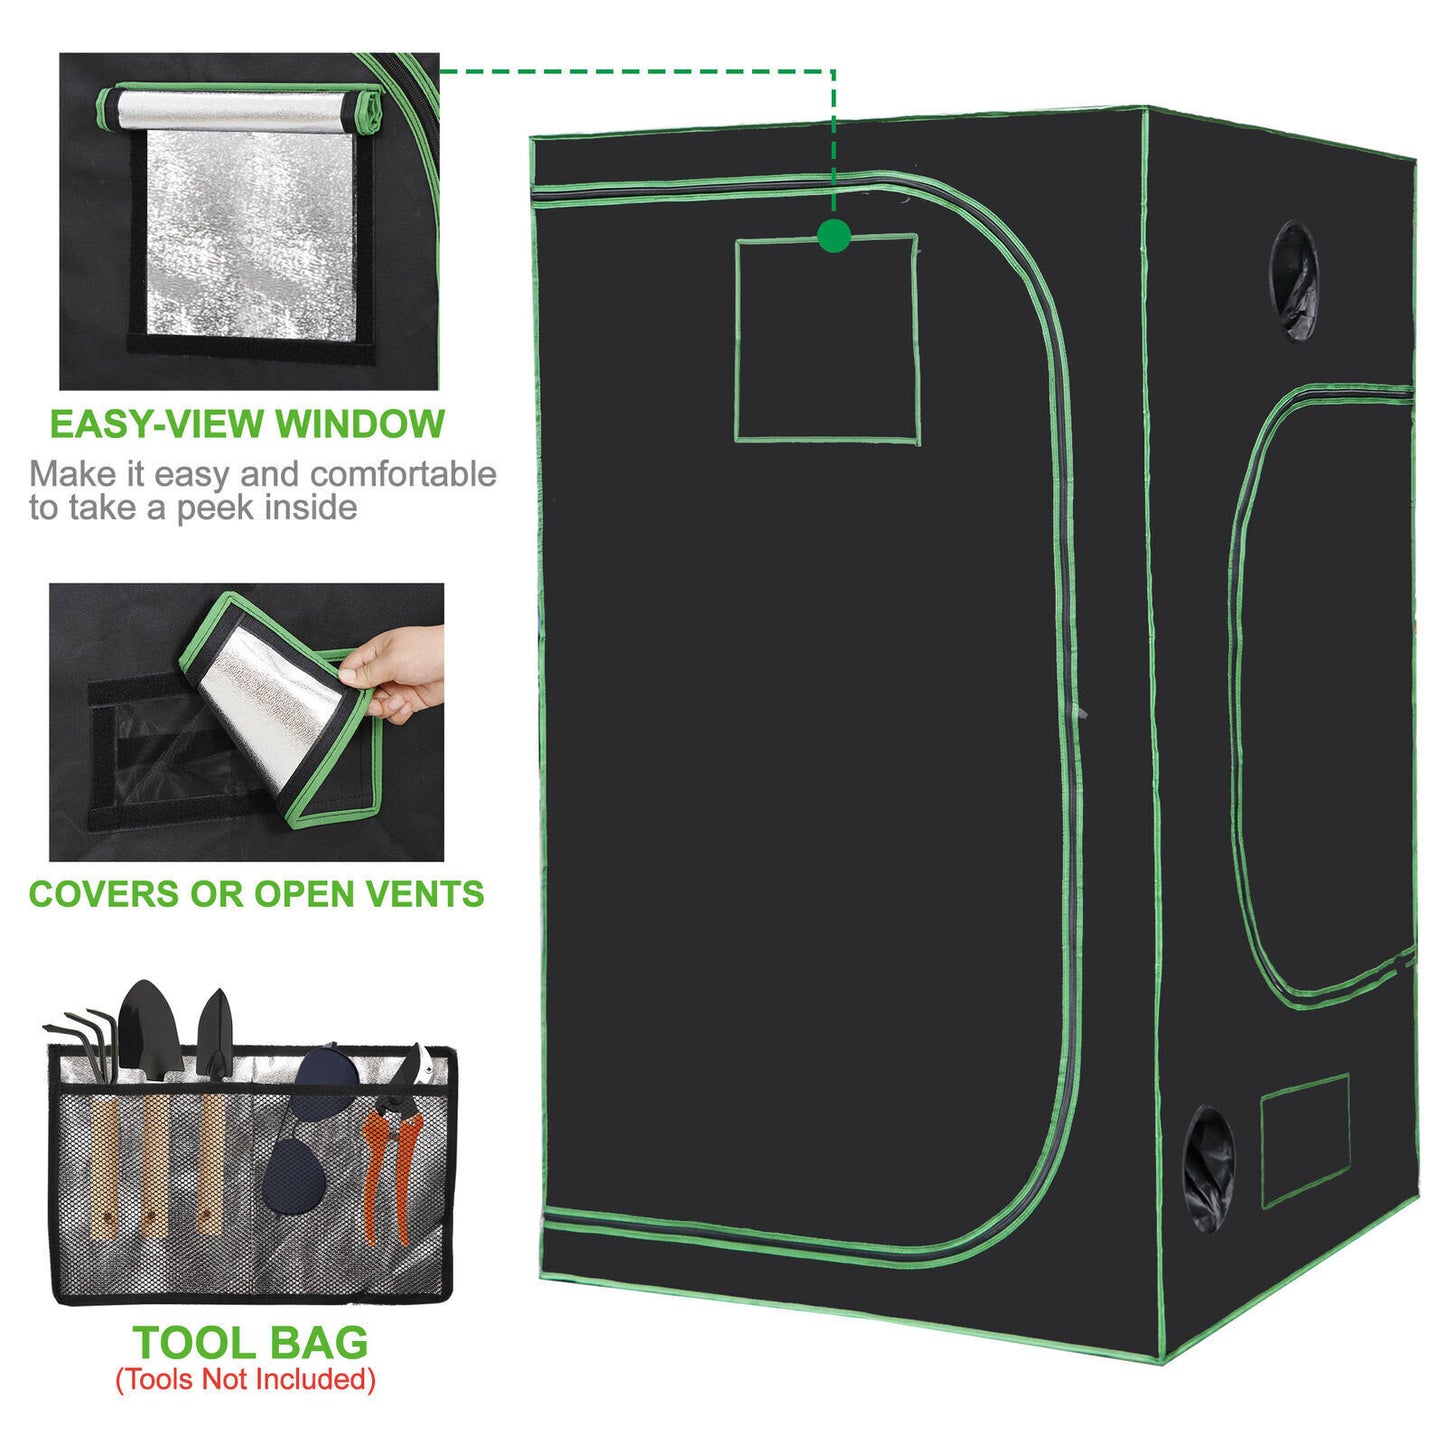 48"x48"x80" Grow Tent Box Seed Room Hydroponic with Window and Floor Tray Indoor